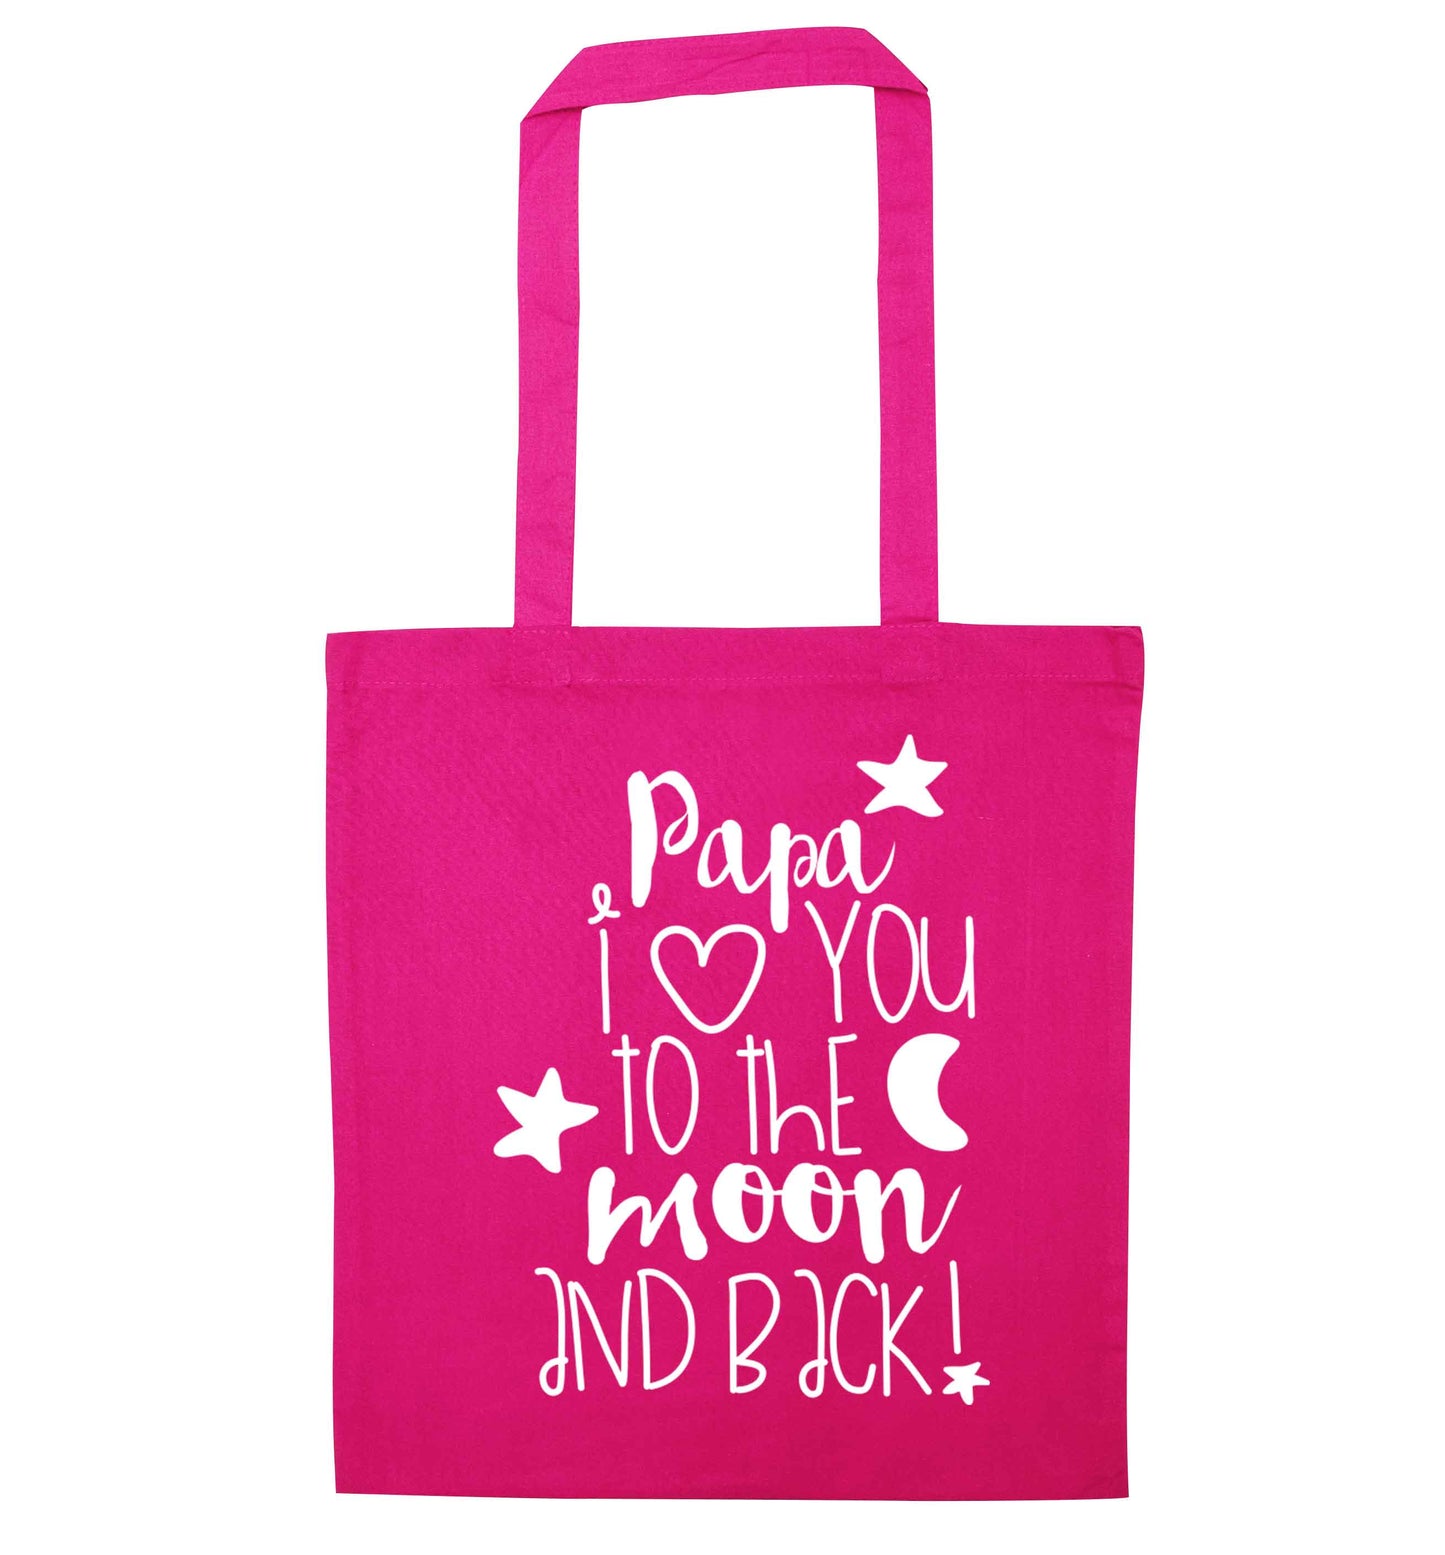 Papa I love you to the moon and back pink tote bag